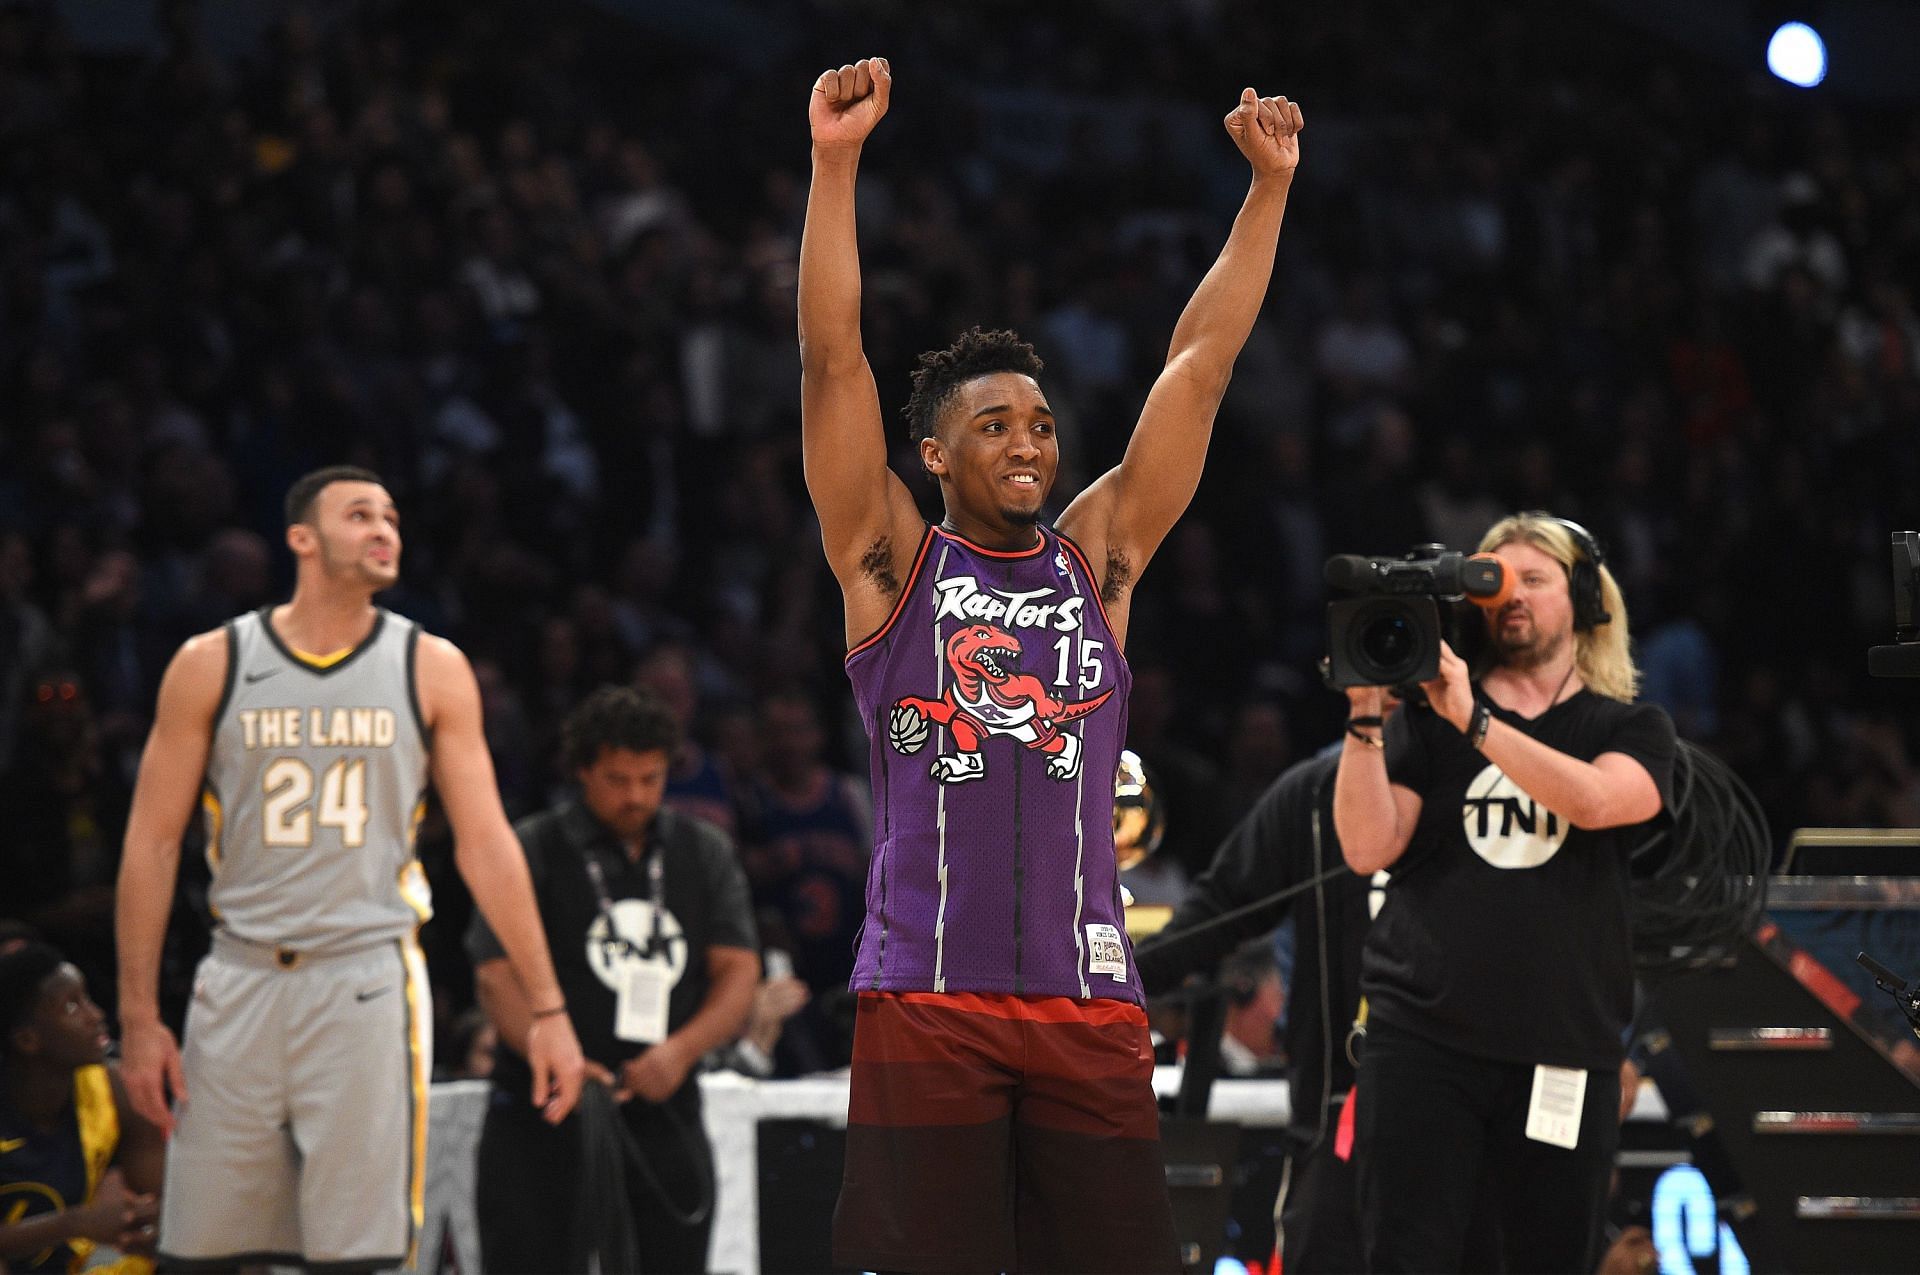 Donovan Mitchell of the Utah Jazz and Larry Nance Jr. (24) of the Cleveland Cavaliers compete in the 2018 Verizon Slam Dunk Contest on Feb. 17, 2018. in Los Angeles, California.